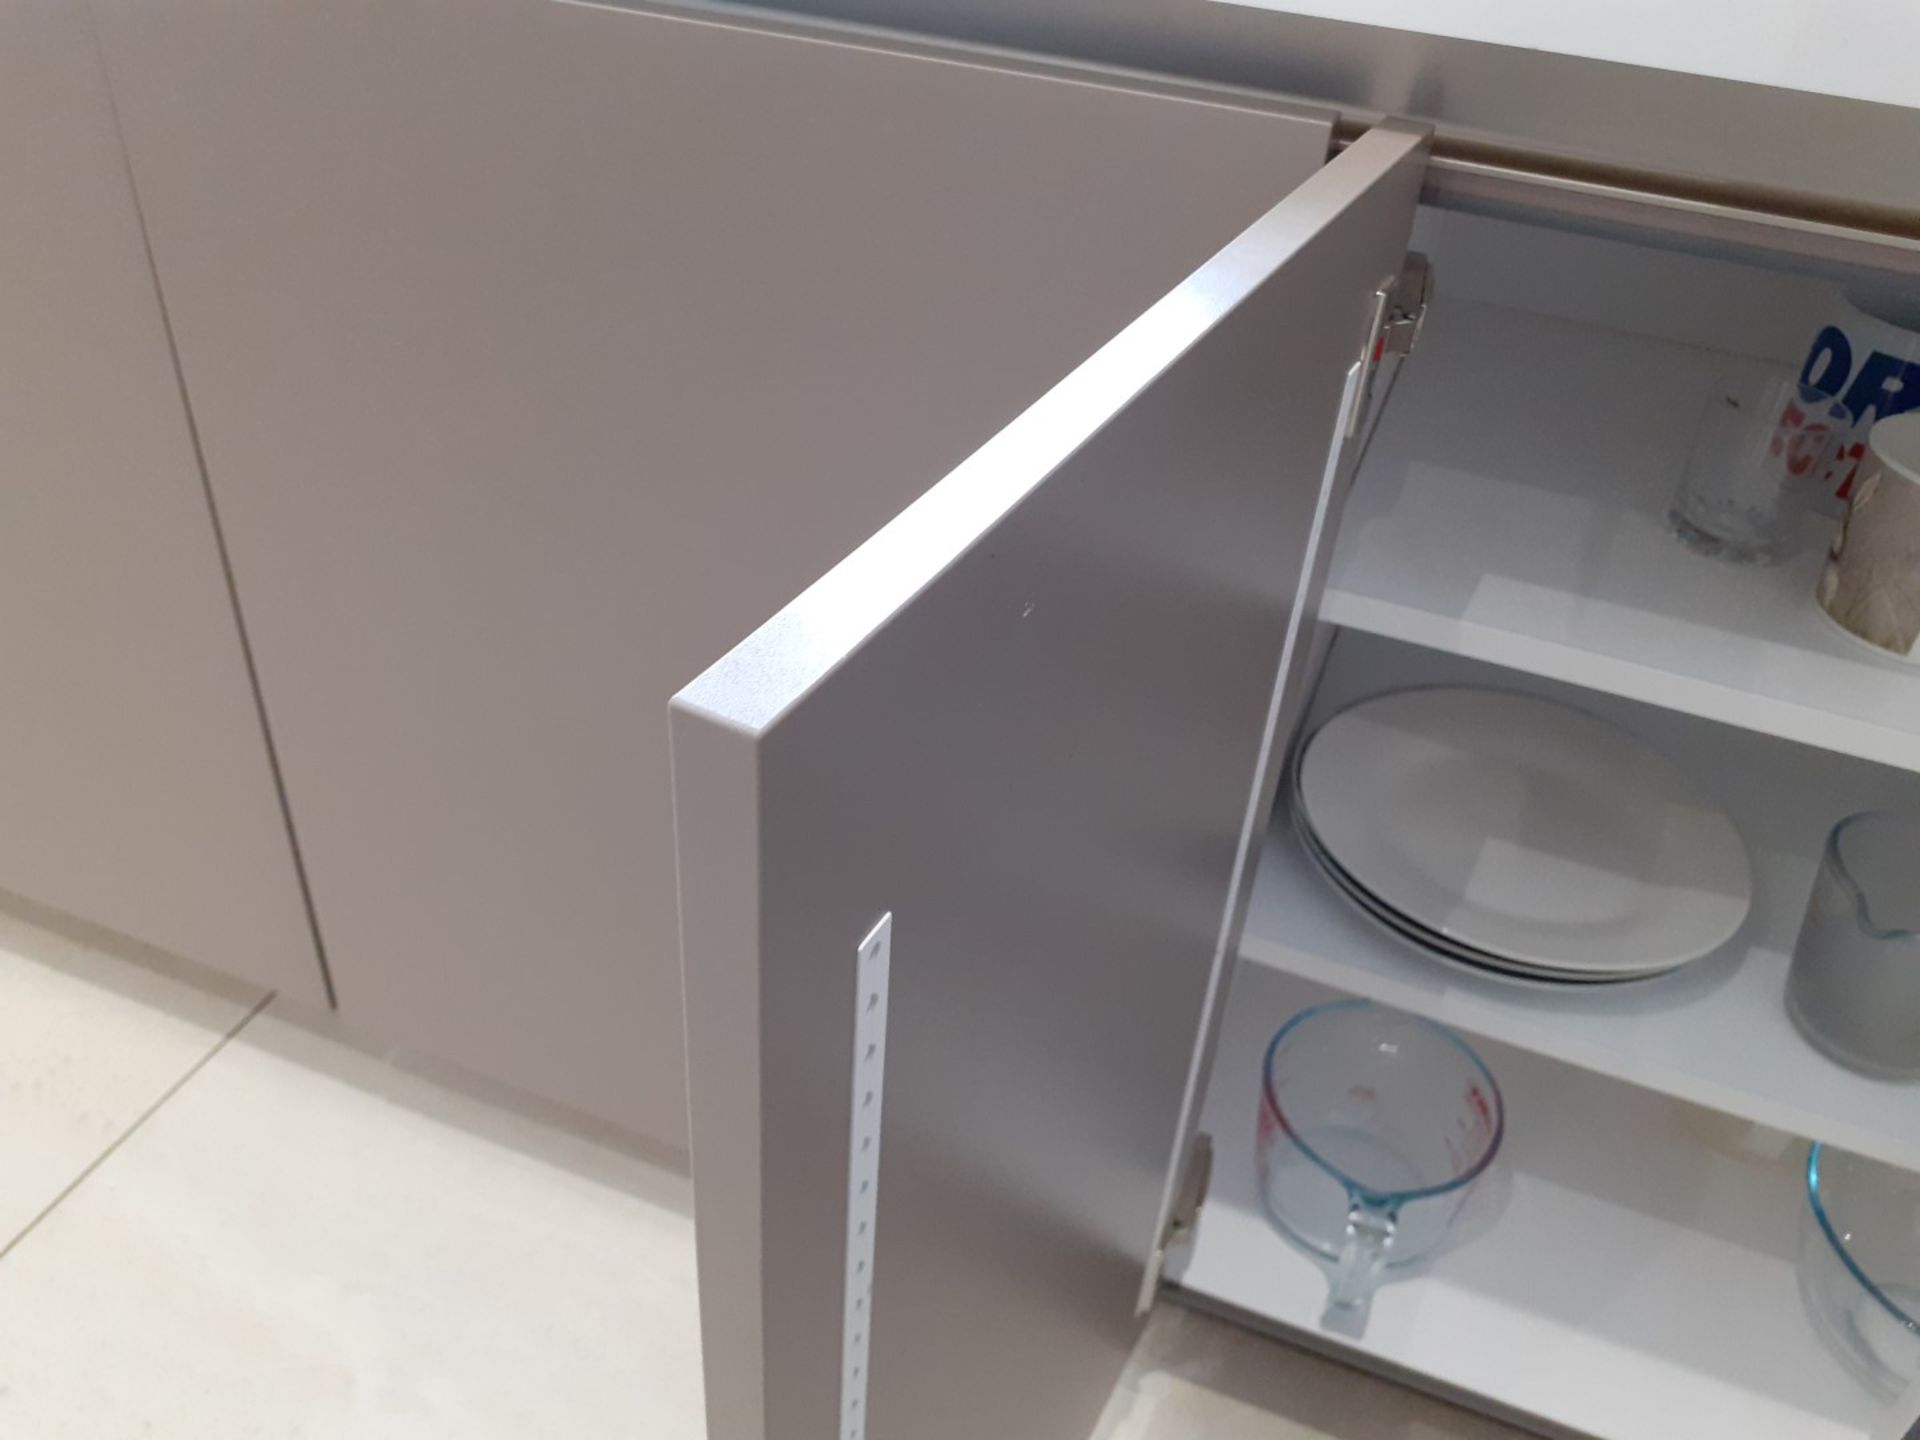 1 x SieMatic Handleless Fitted Kitchen With Intergrated NEFF Appliances, Corian Worktops And Island - Image 69 of 92